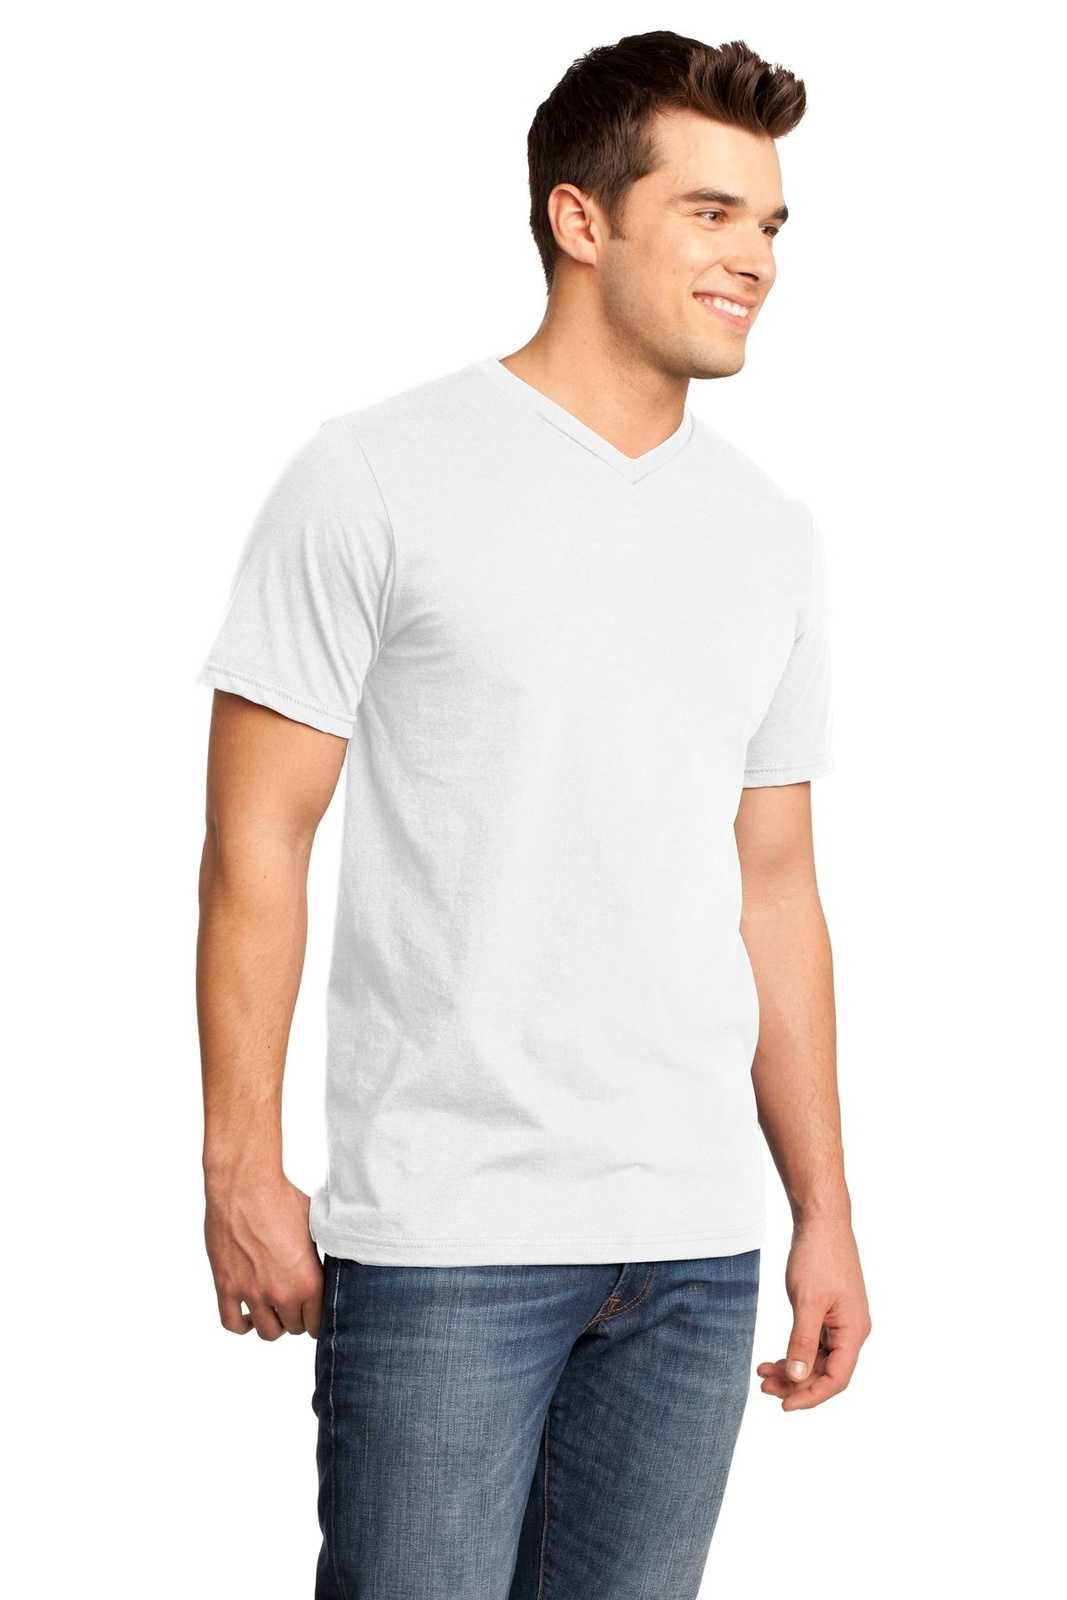 District DT6500 Very Important Tee V-Neck - White - HIT a Double - 4